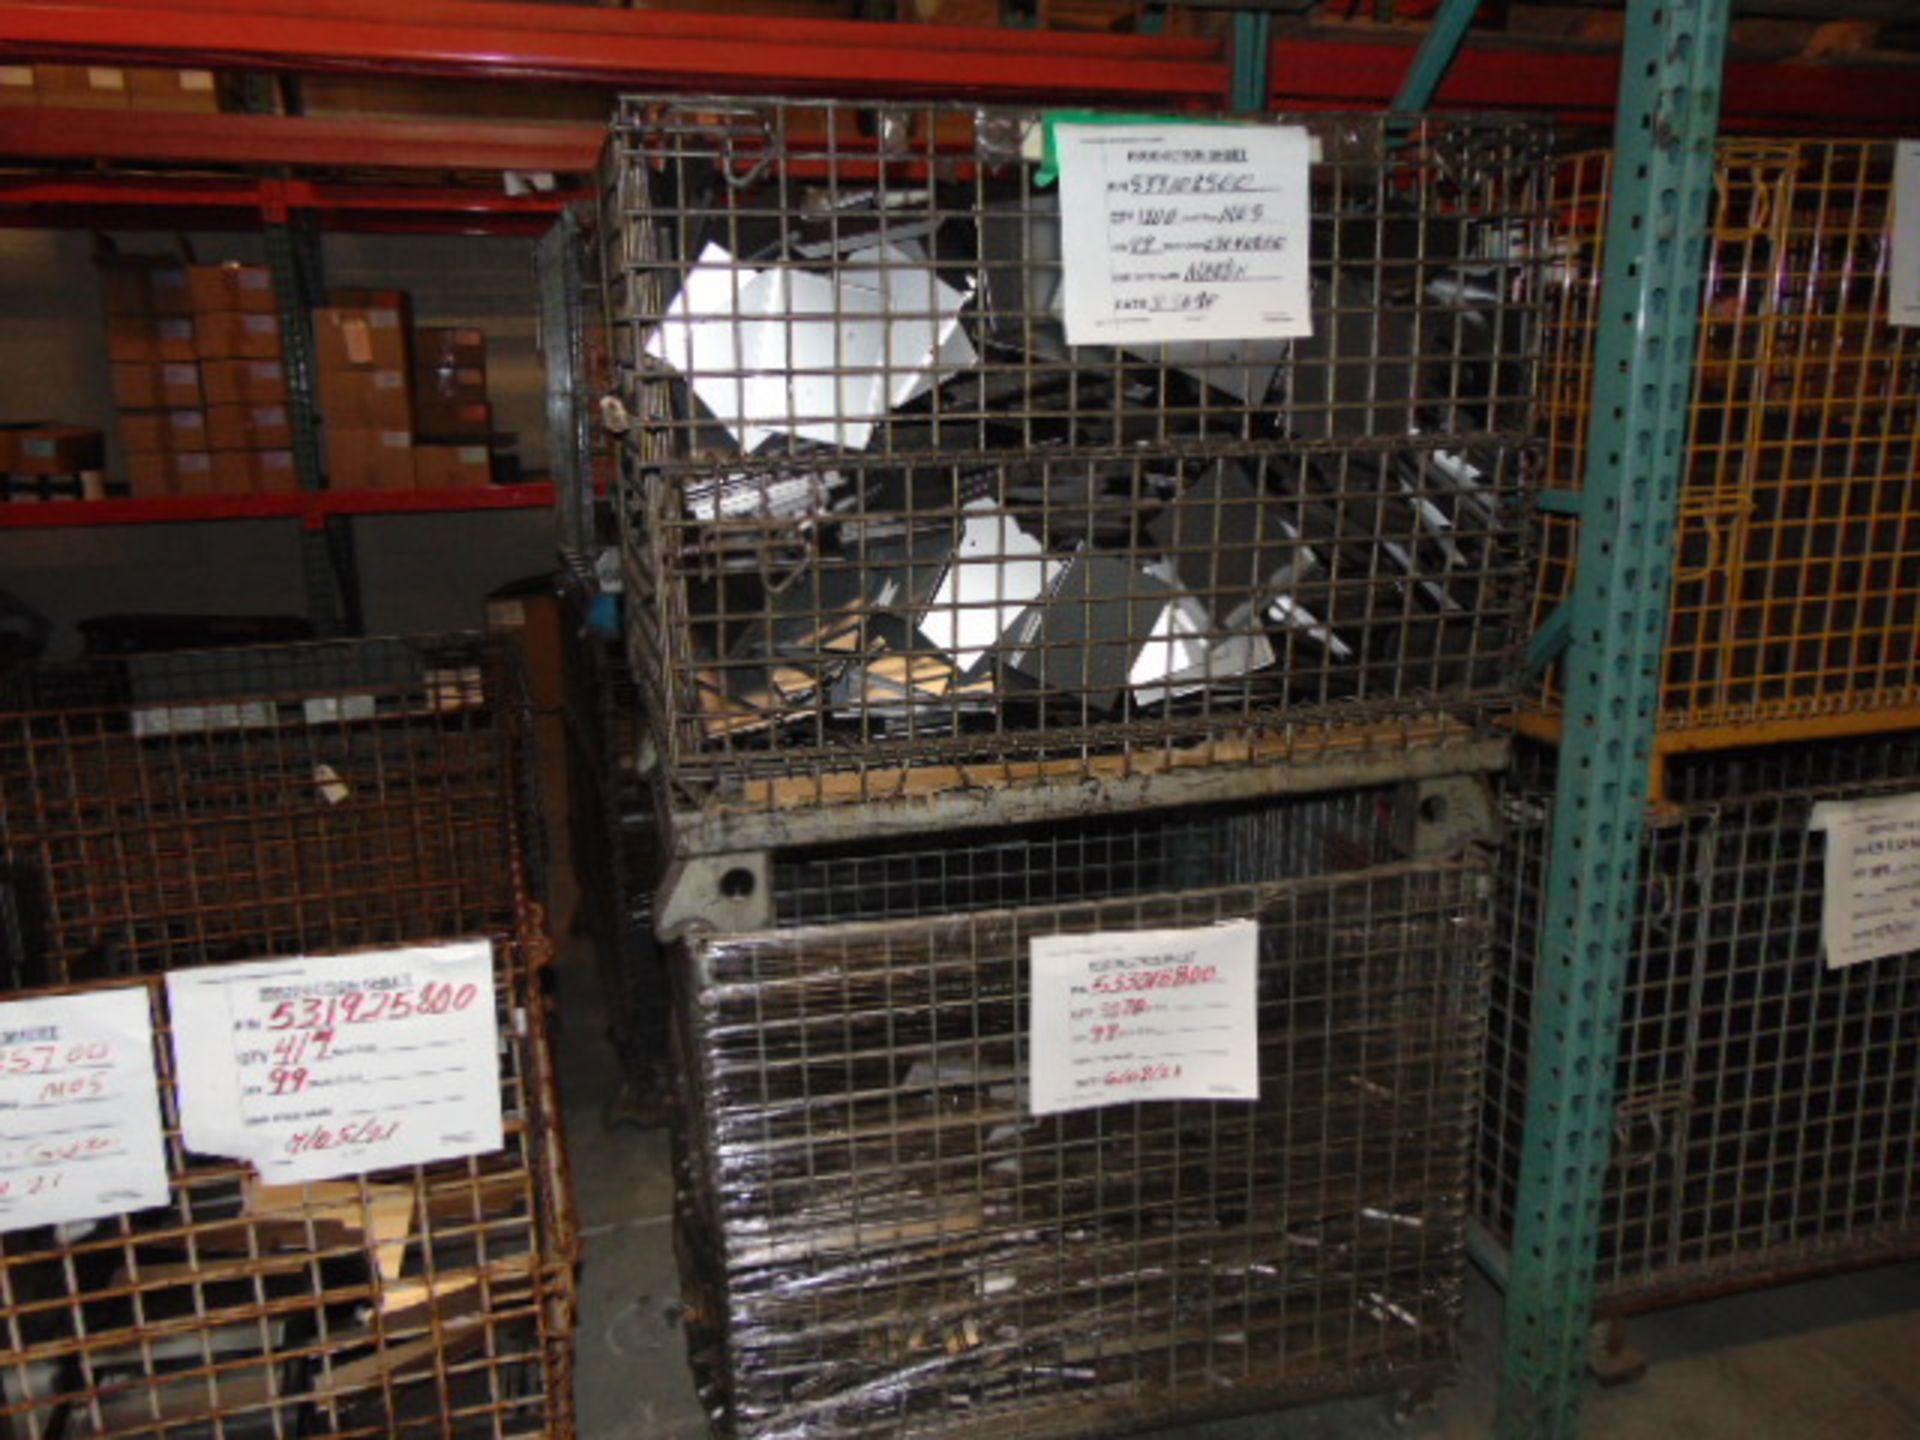 LOT CONSISTING OF: assorted steel in process parts, wire baskets & cardboard (no dies or racks) ( - Image 17 of 39